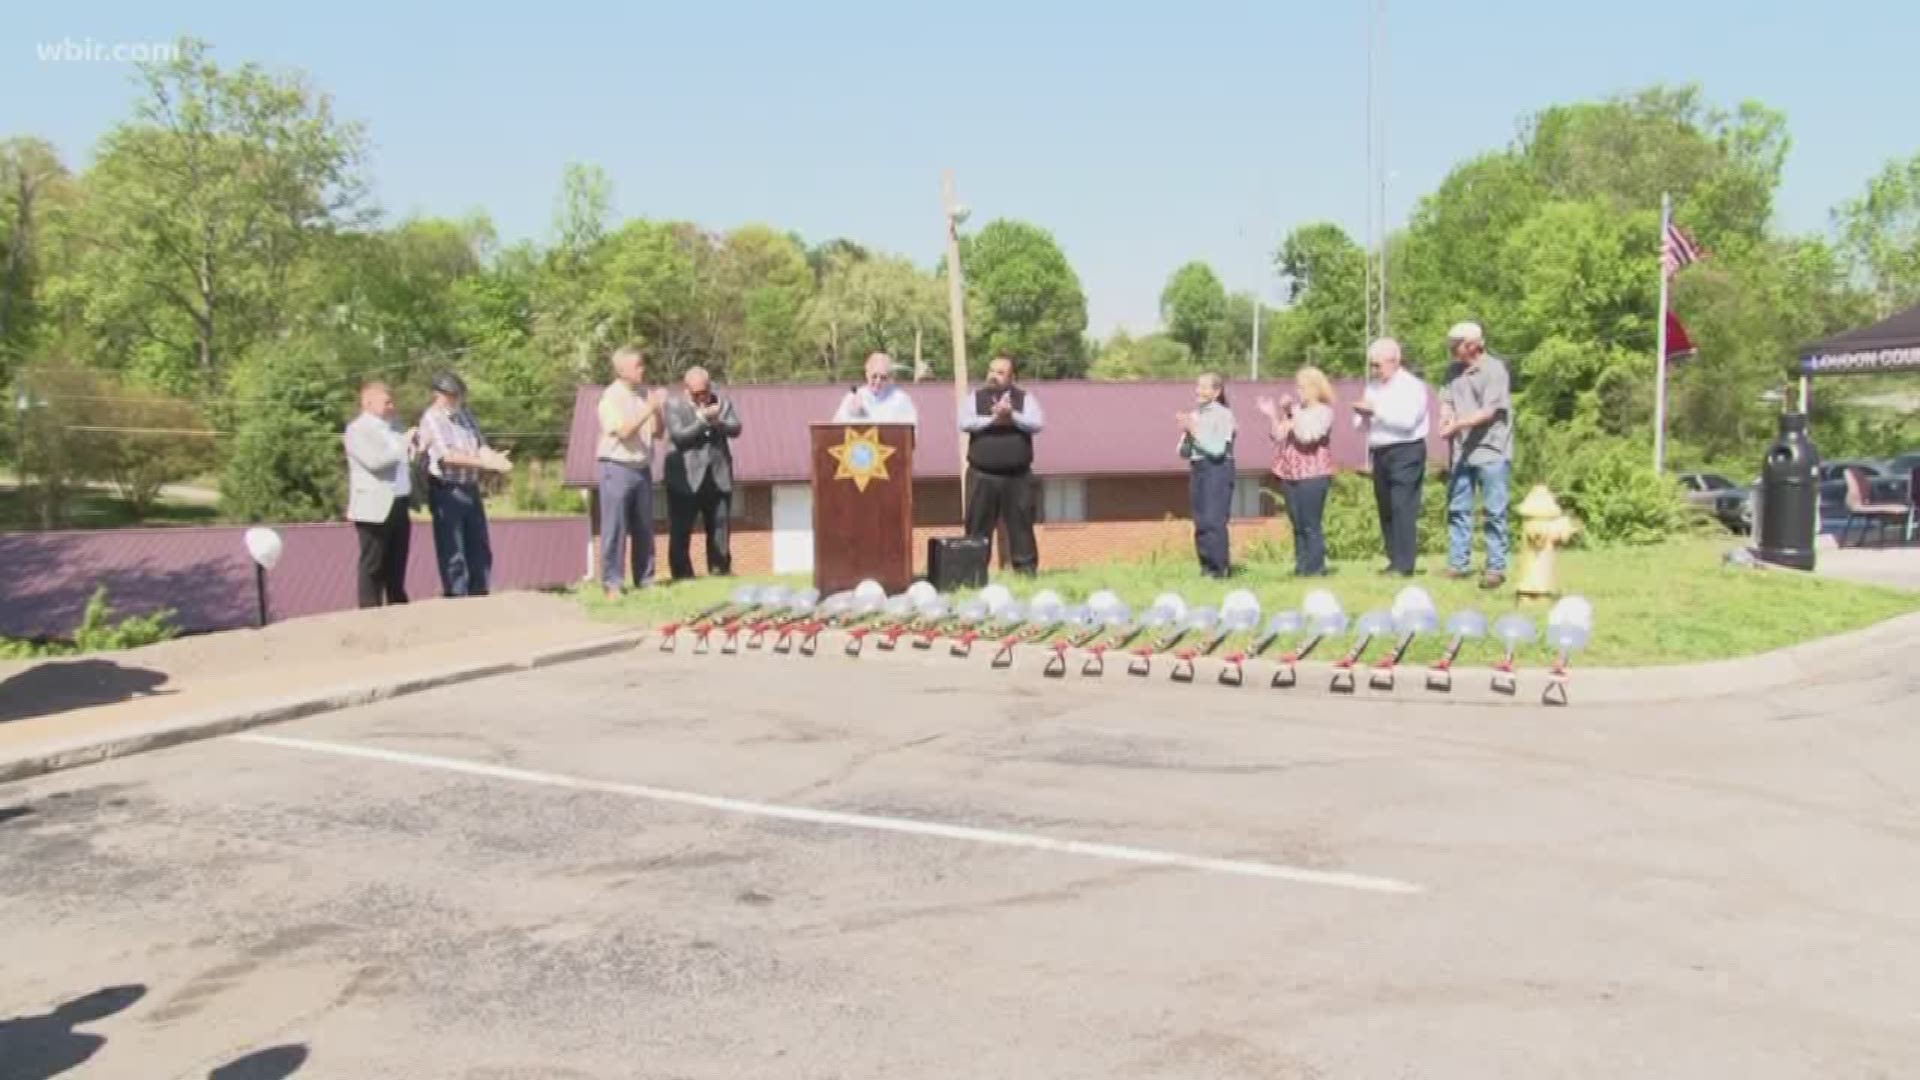 April 27, 2018: Loudon County leaders broke ground on a new jail.